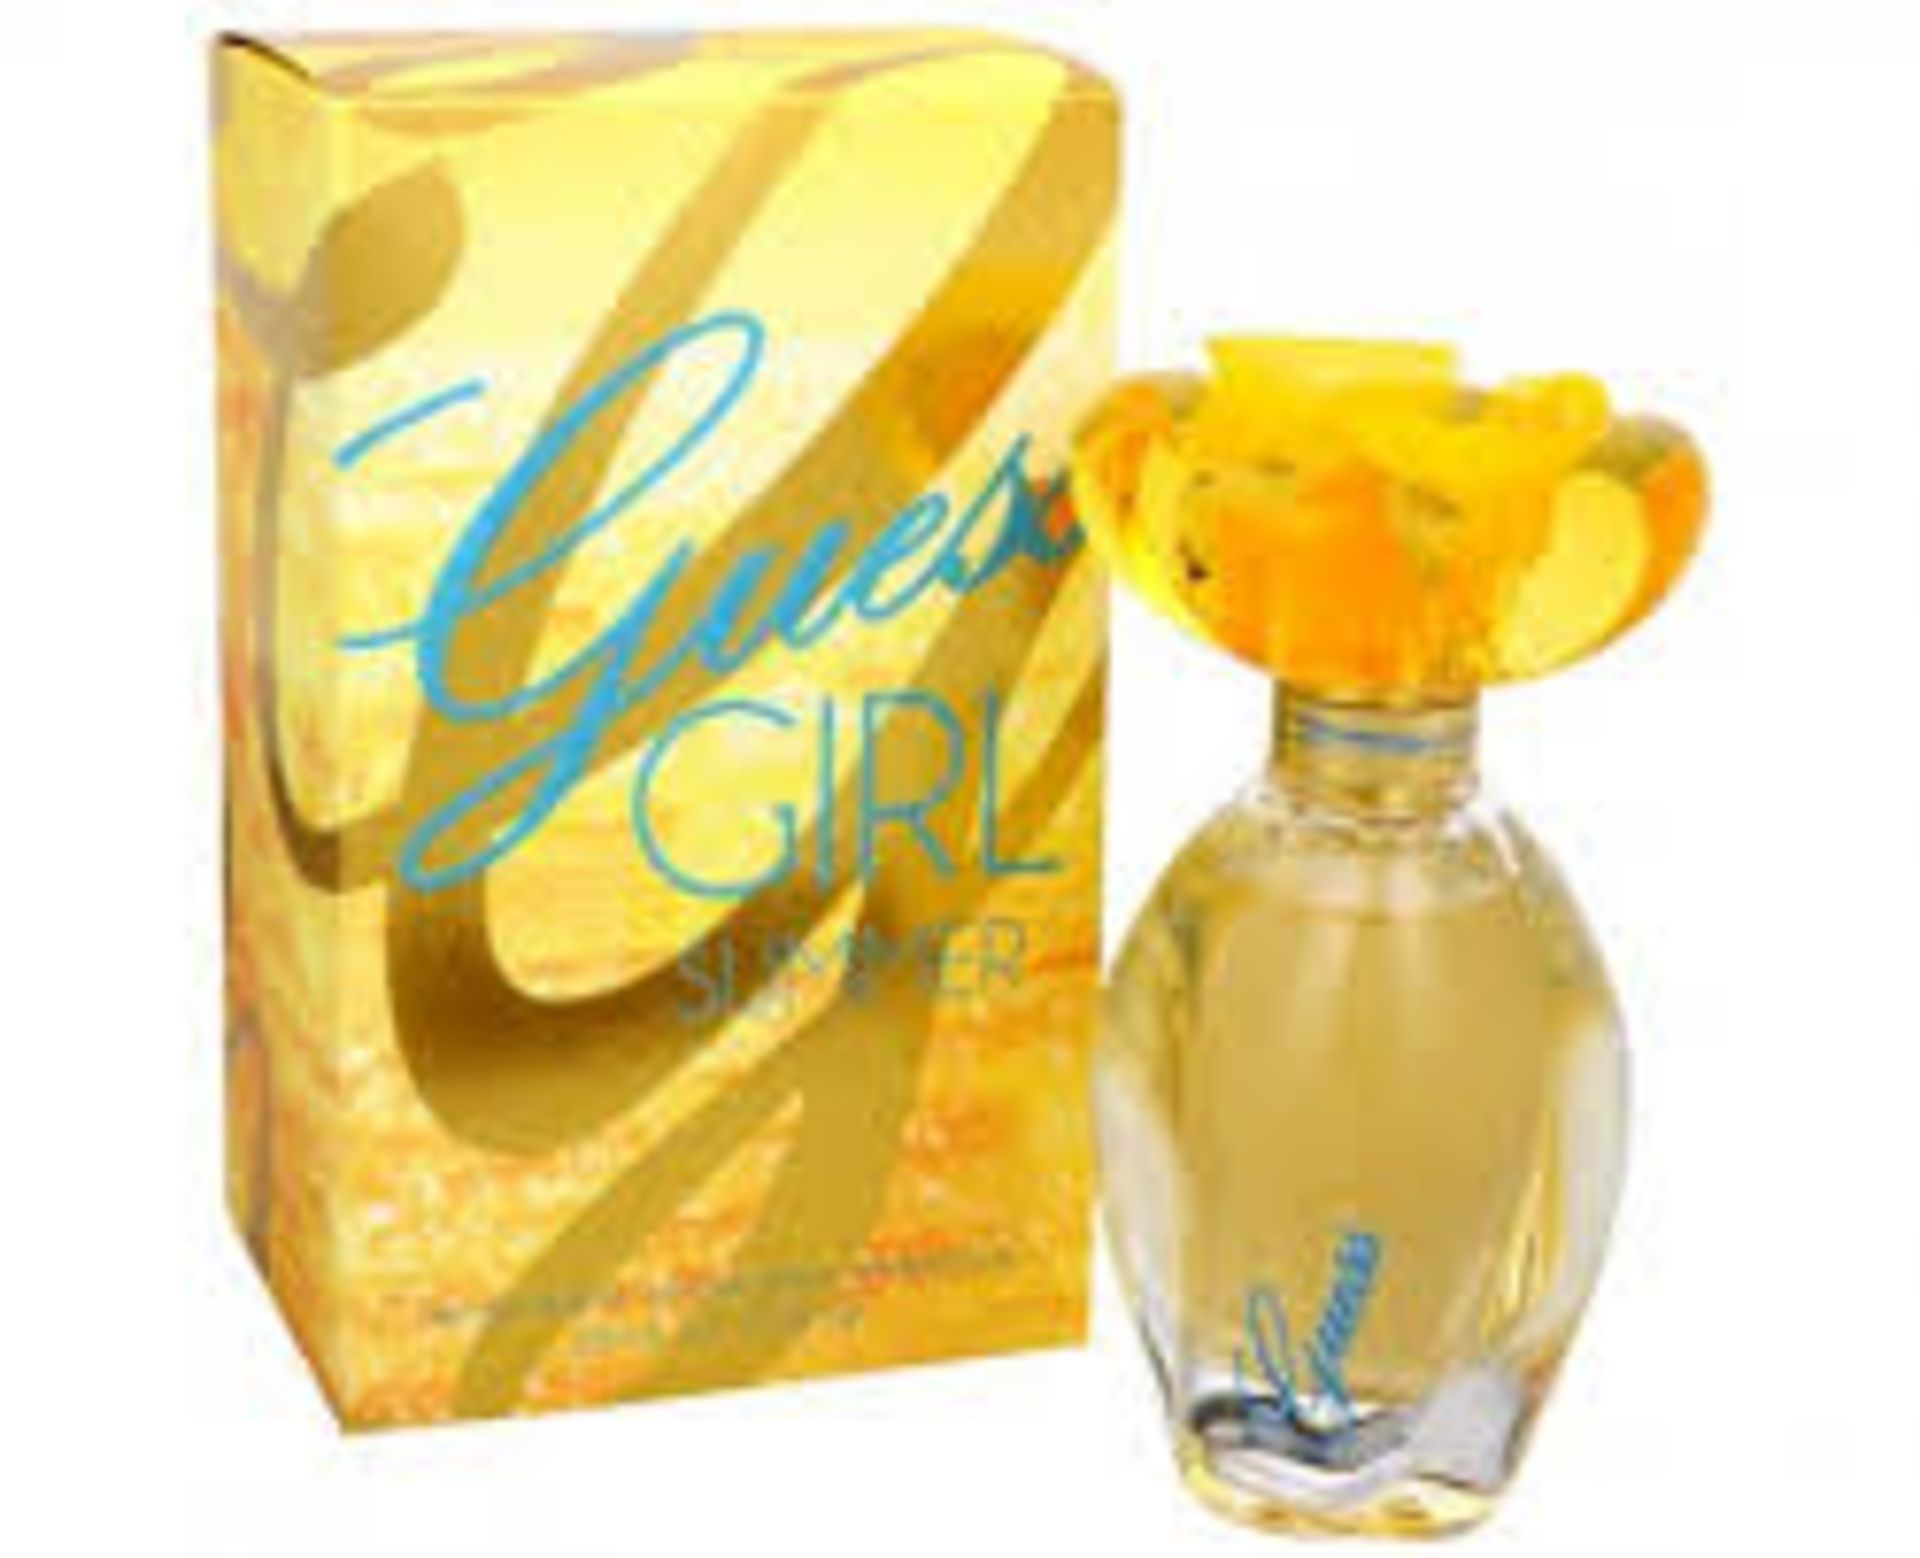 V Brand New Guess Girl Summer Eau De Toilette Natural Spray X 2 YOUR BID PRICE TO BE MULTIPLIED BY